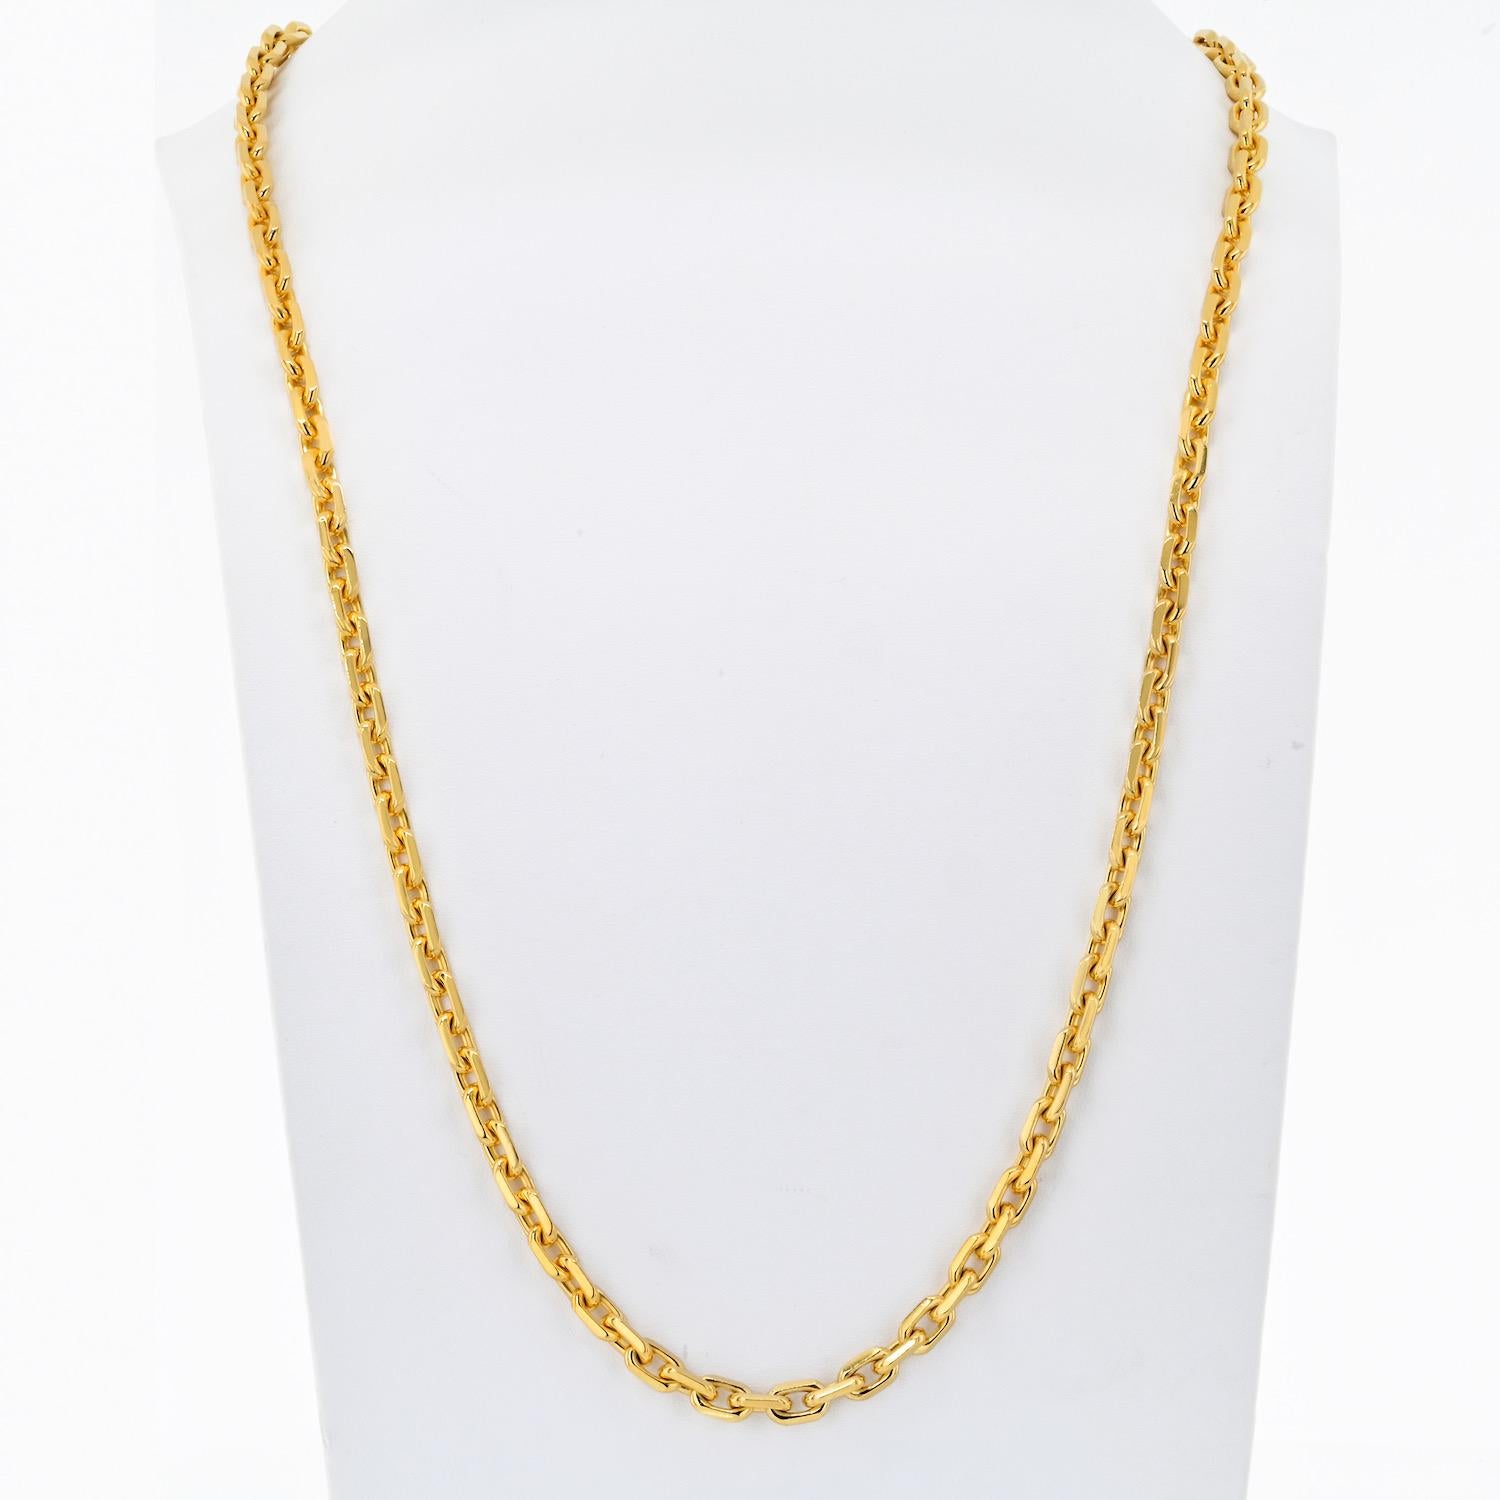 Adorn yourself with the timeless allure of this Boucheron 18K Yellow Gold Link Chain, a statement necklace that exudes sophistication and luxury. Crafted with precision and attention to detail, this exquisite piece boasts a length of 35 inches,